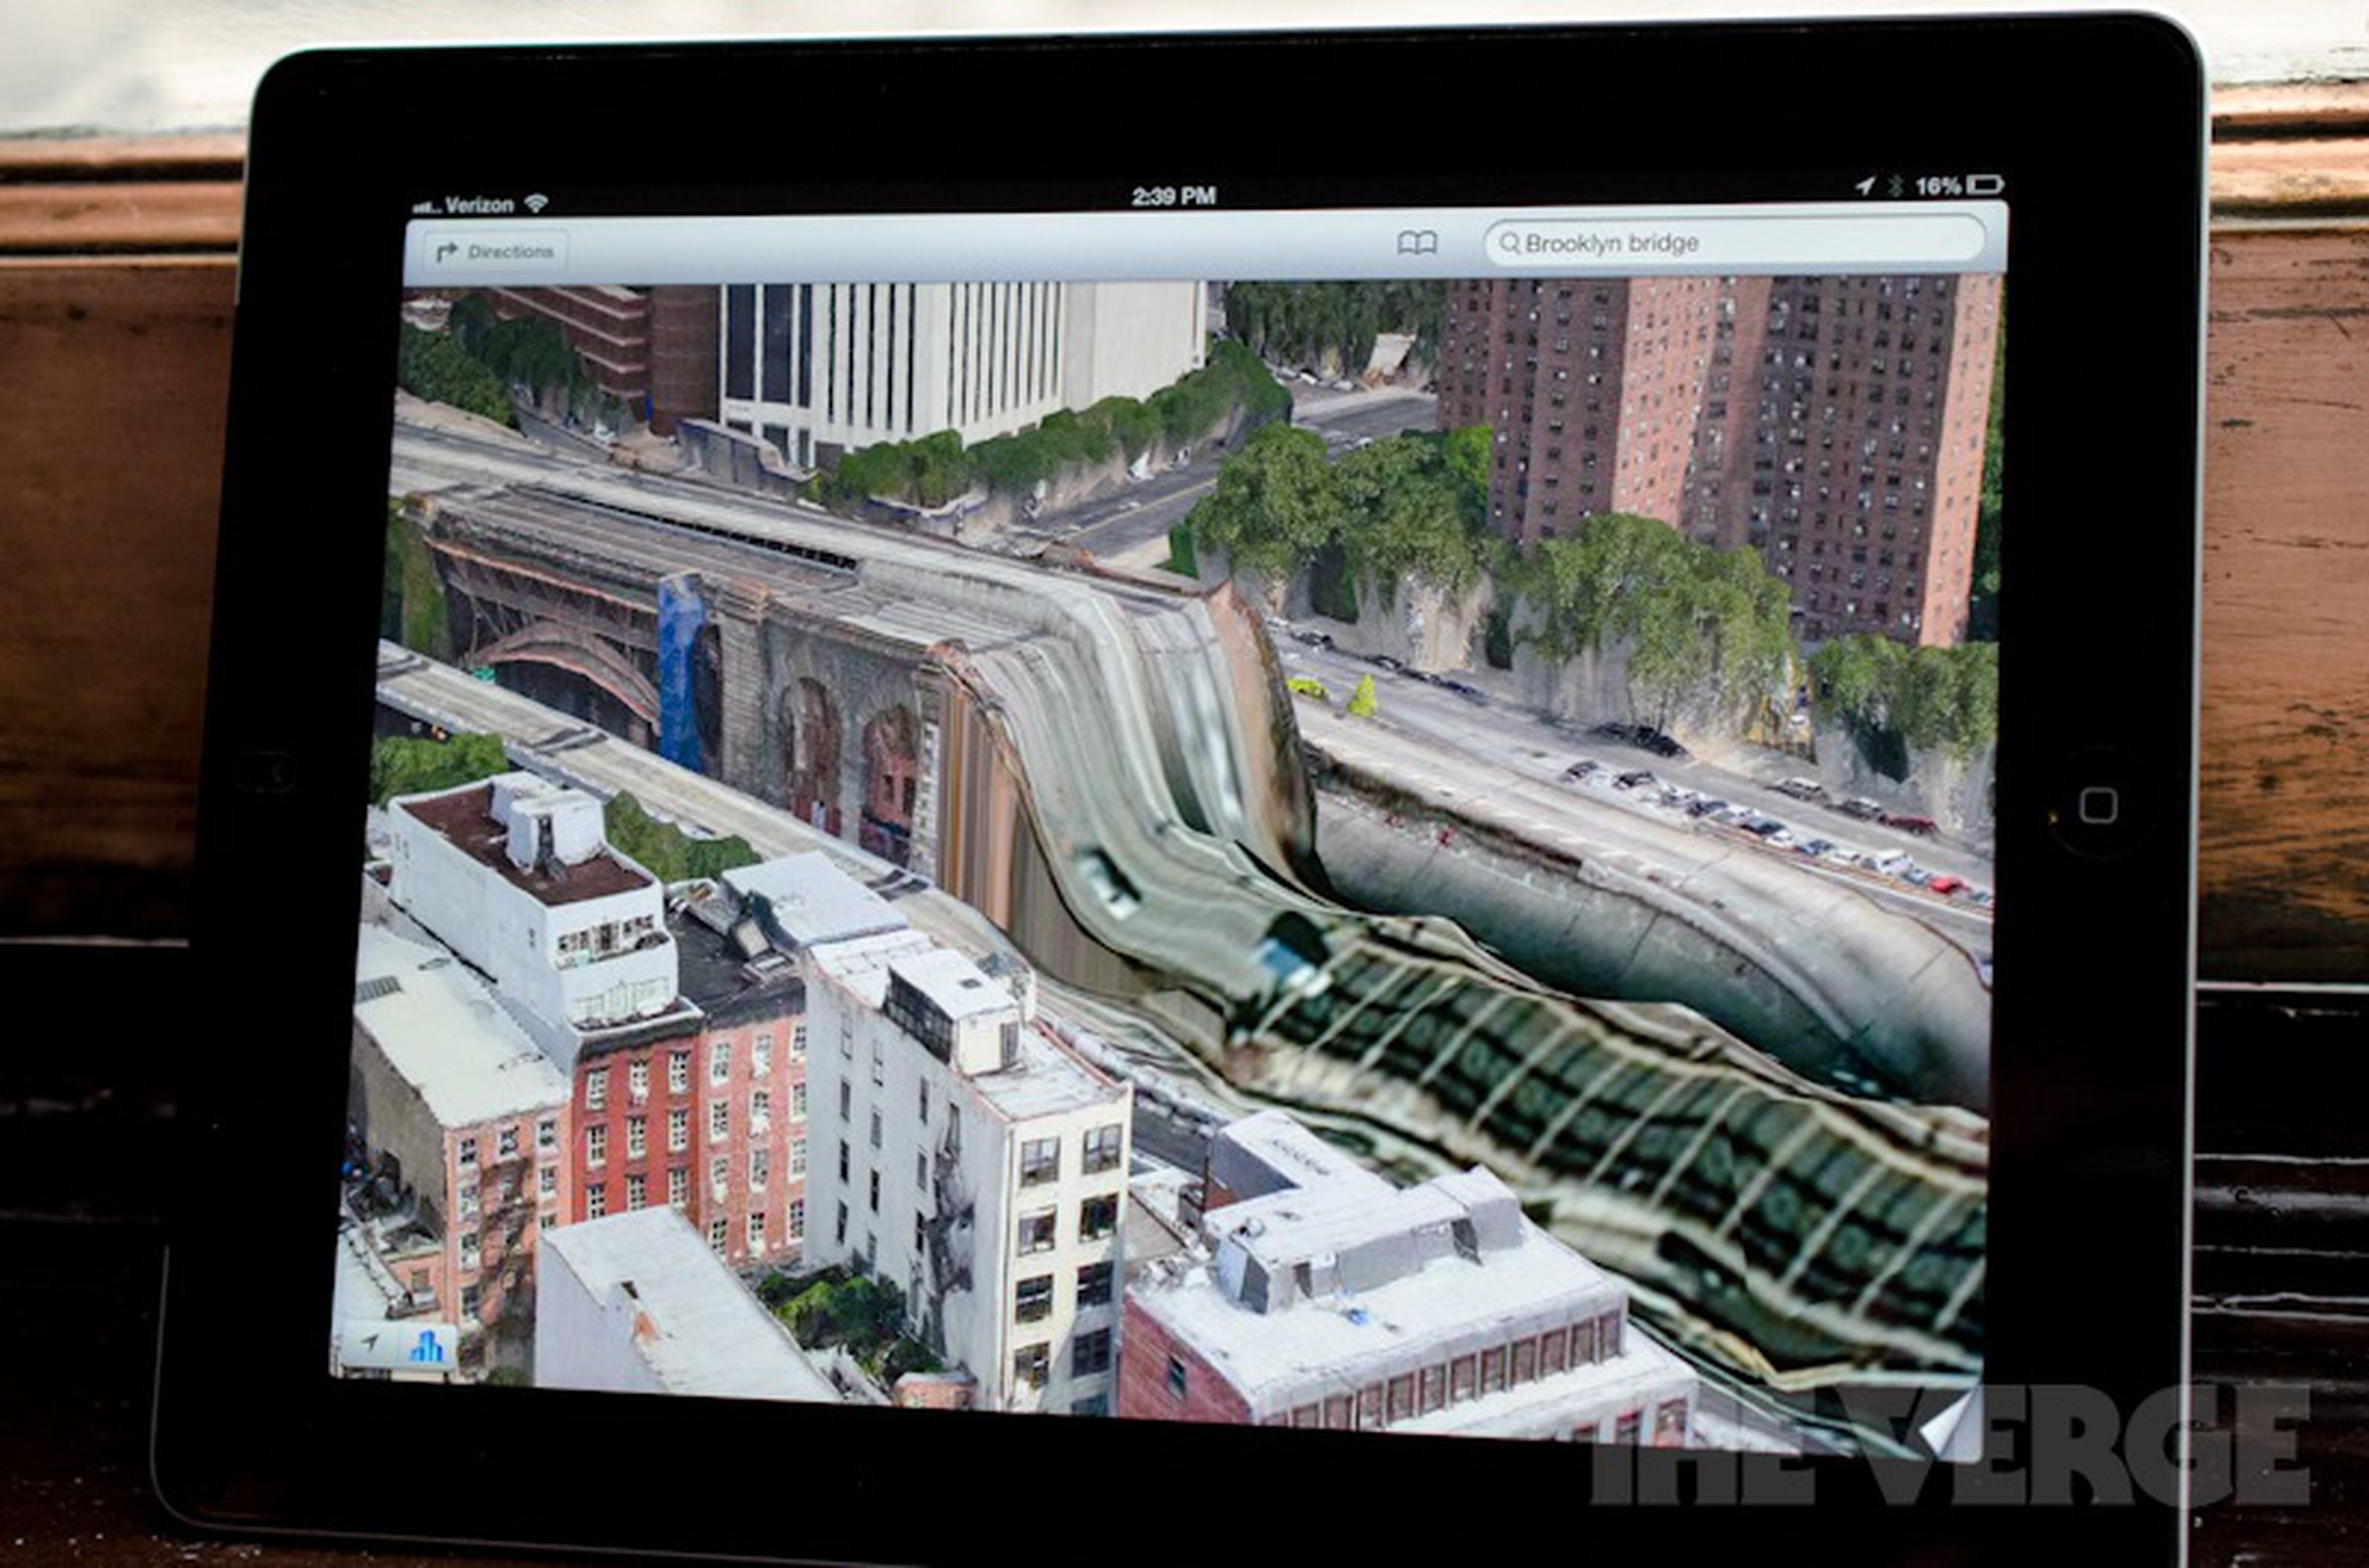 The Brooklyn Bridge appears to be melting in an early version of Apple Maps on an iPad.